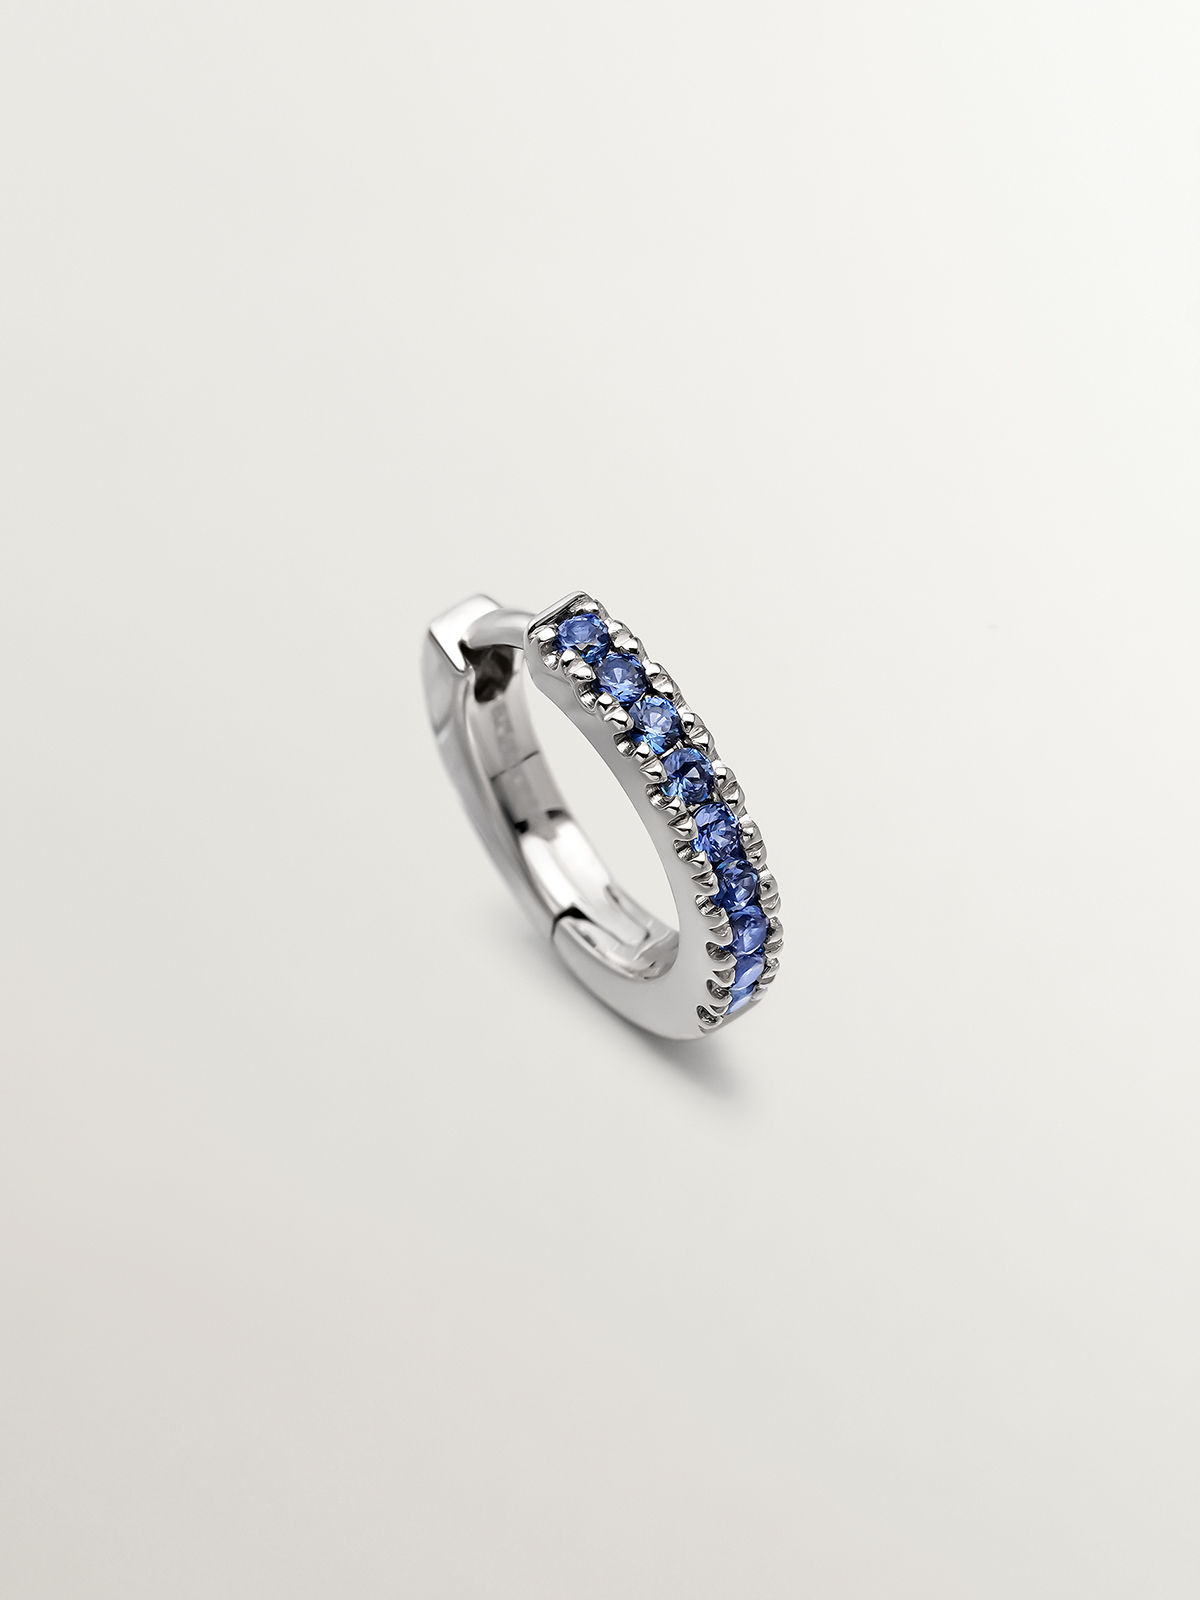 Individual 9K white gold hoop earring with blue sapphires.